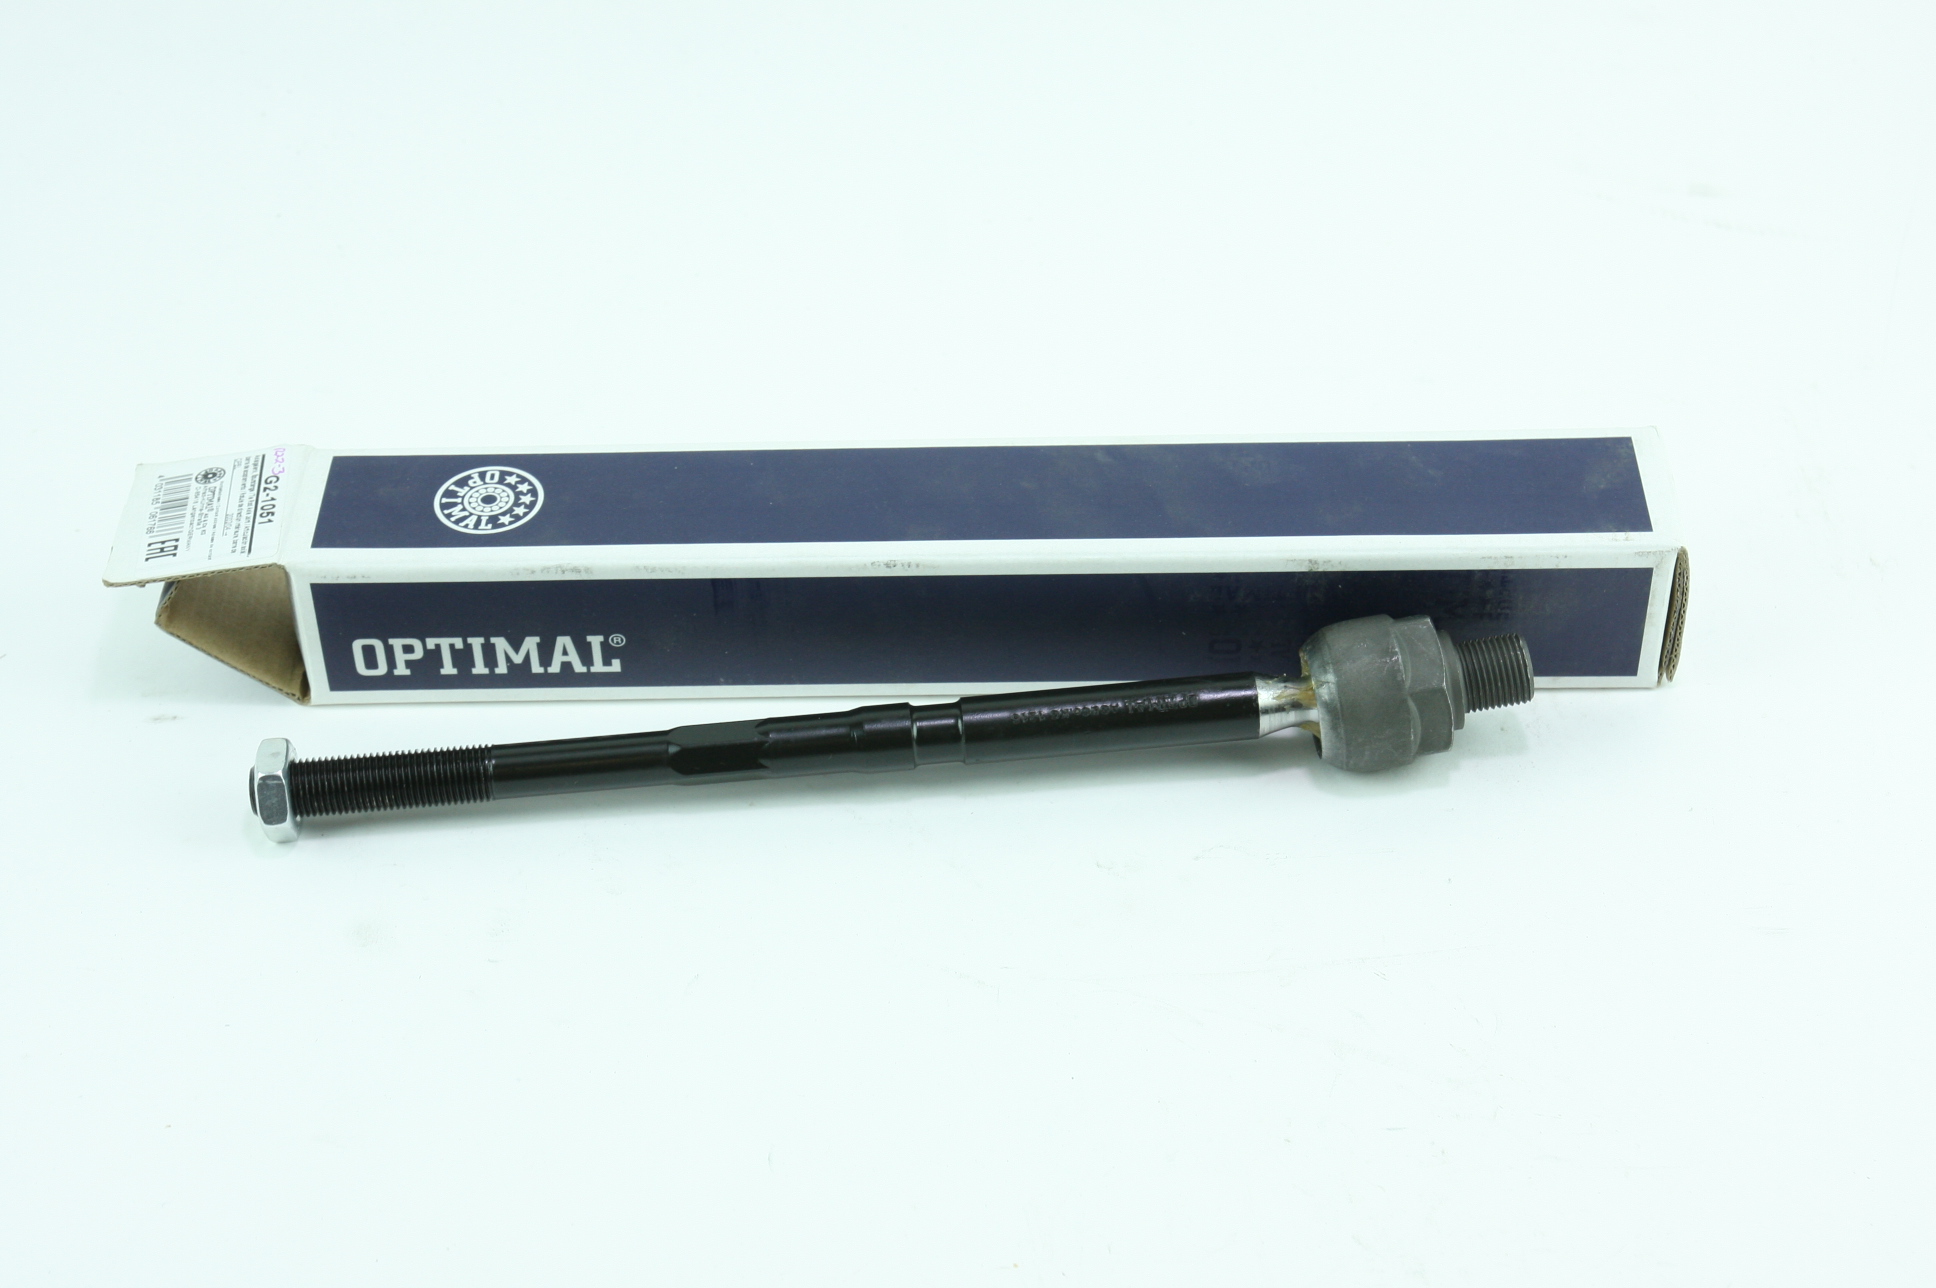 ** New Optimal German Made G2-1051 Tie Rod End for Saab Opel Fast Free Shipping - image 1